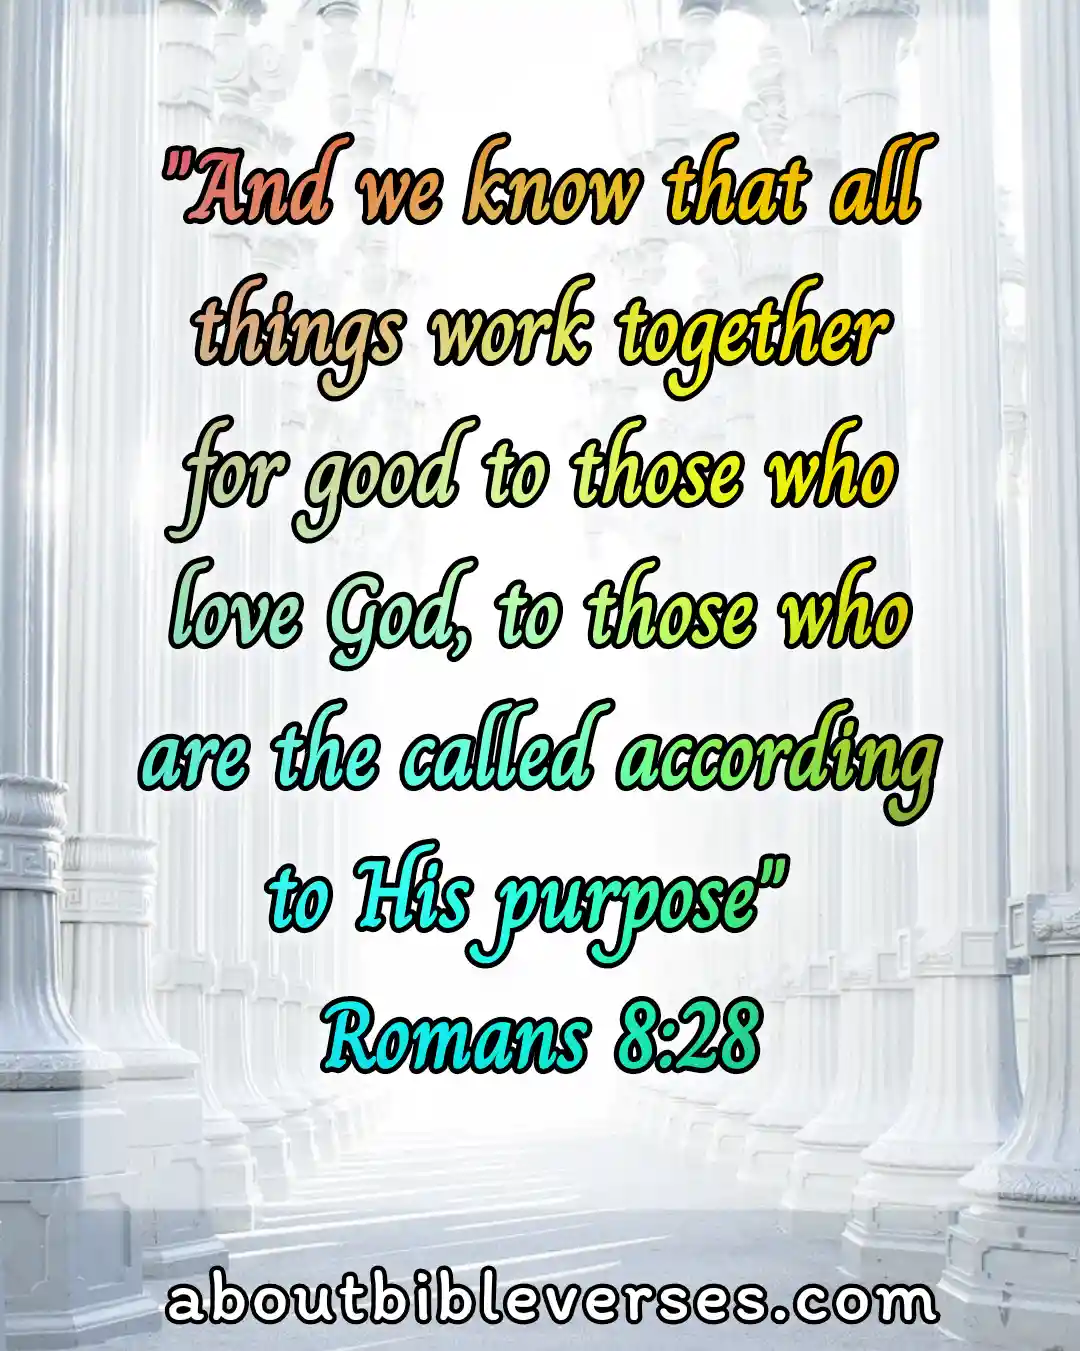 Bible Verses About Unity And Working Together (Romans 8:28)